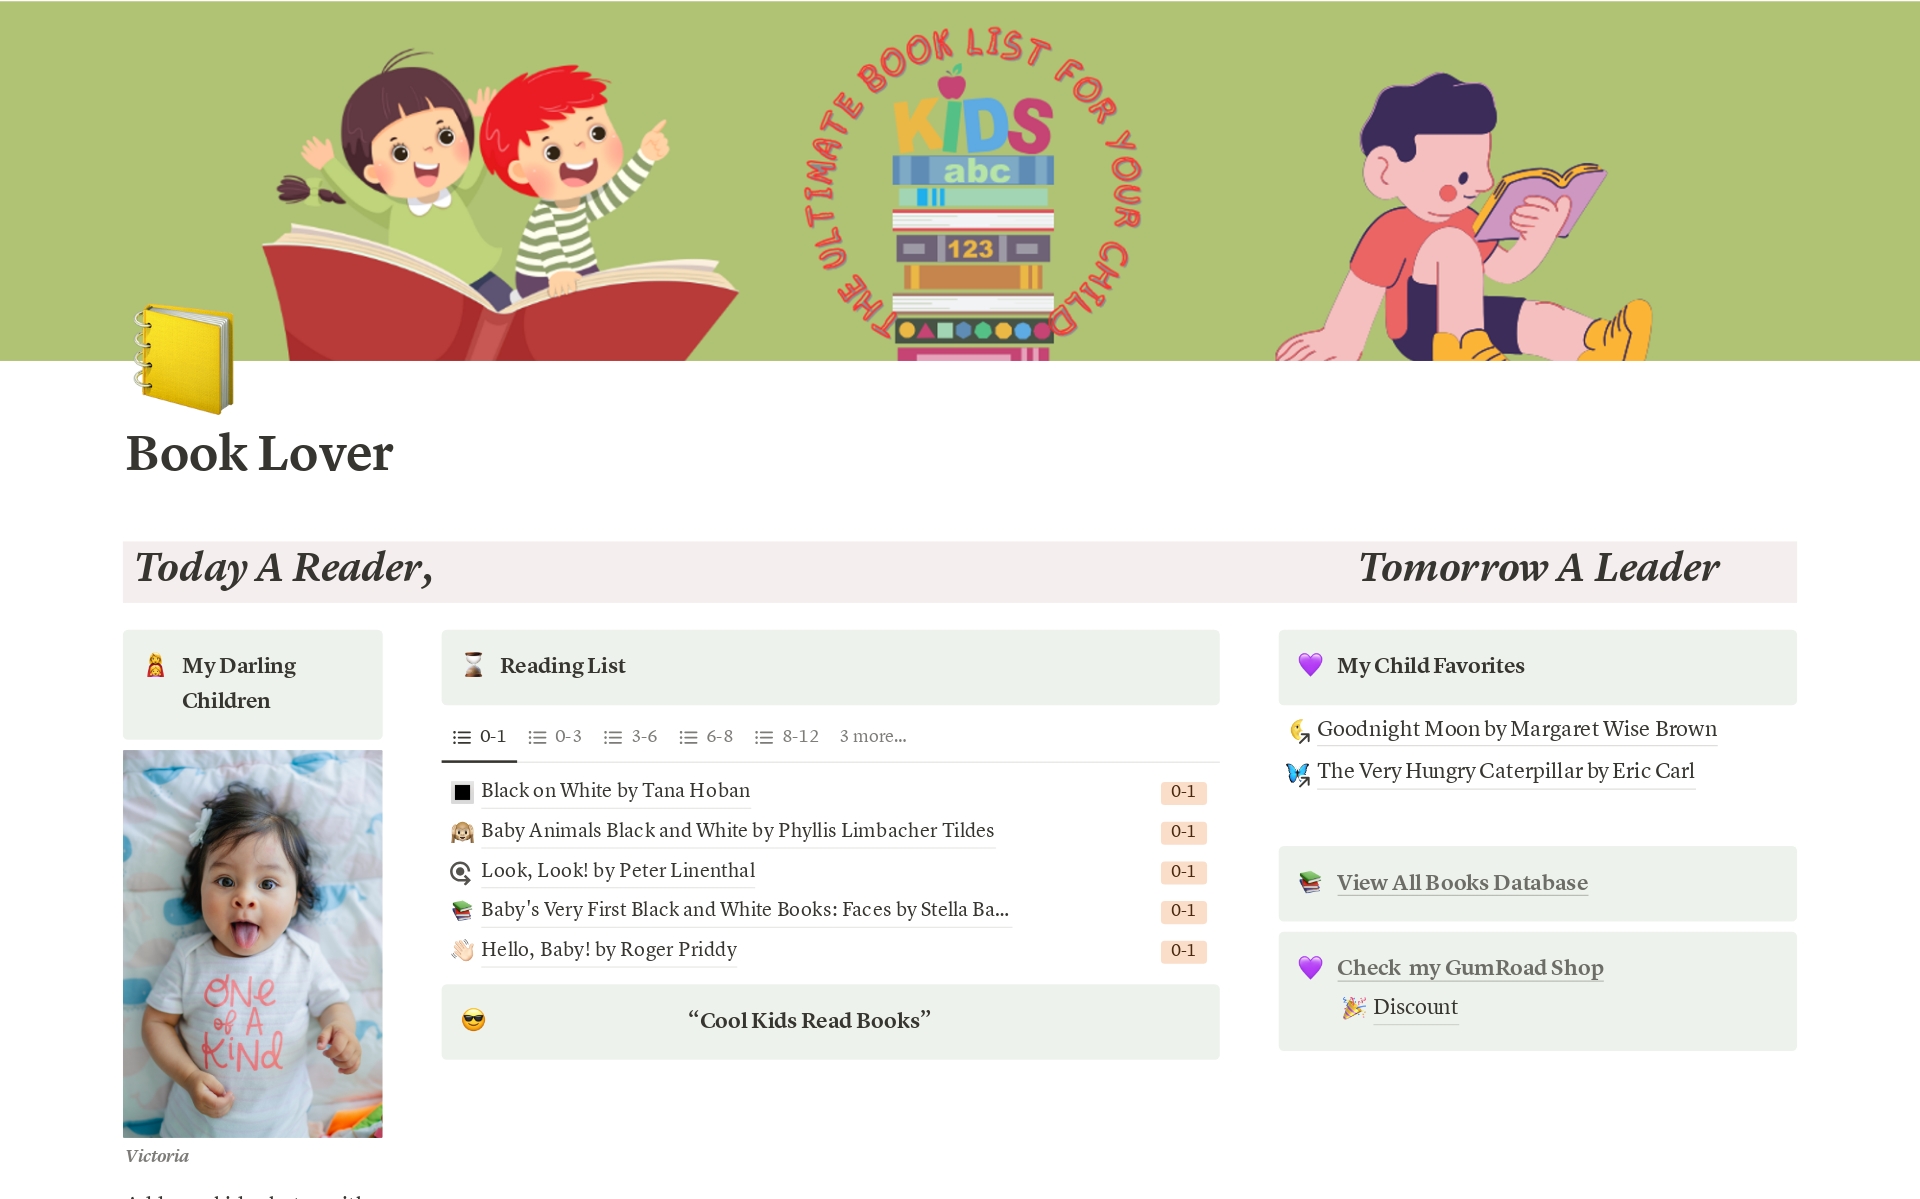 Carefully Curated Book Recommendations sorted by Age category. Tracking books for multiple children is also supported in this template.